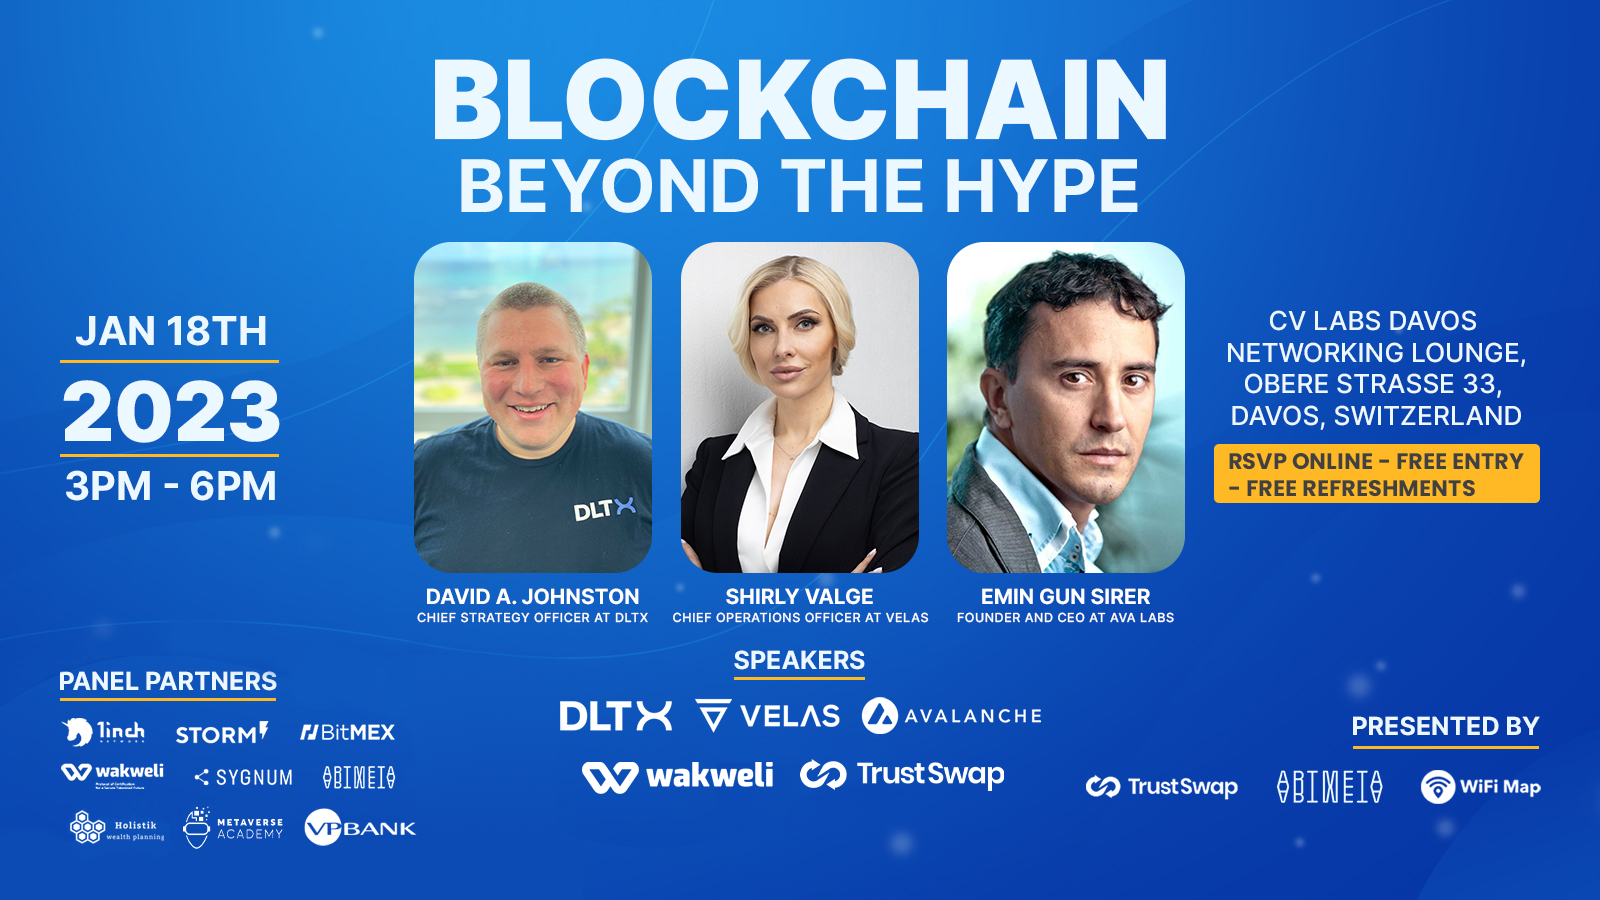 TrustSwap and Friends Host Live Blockchain Event in Davos